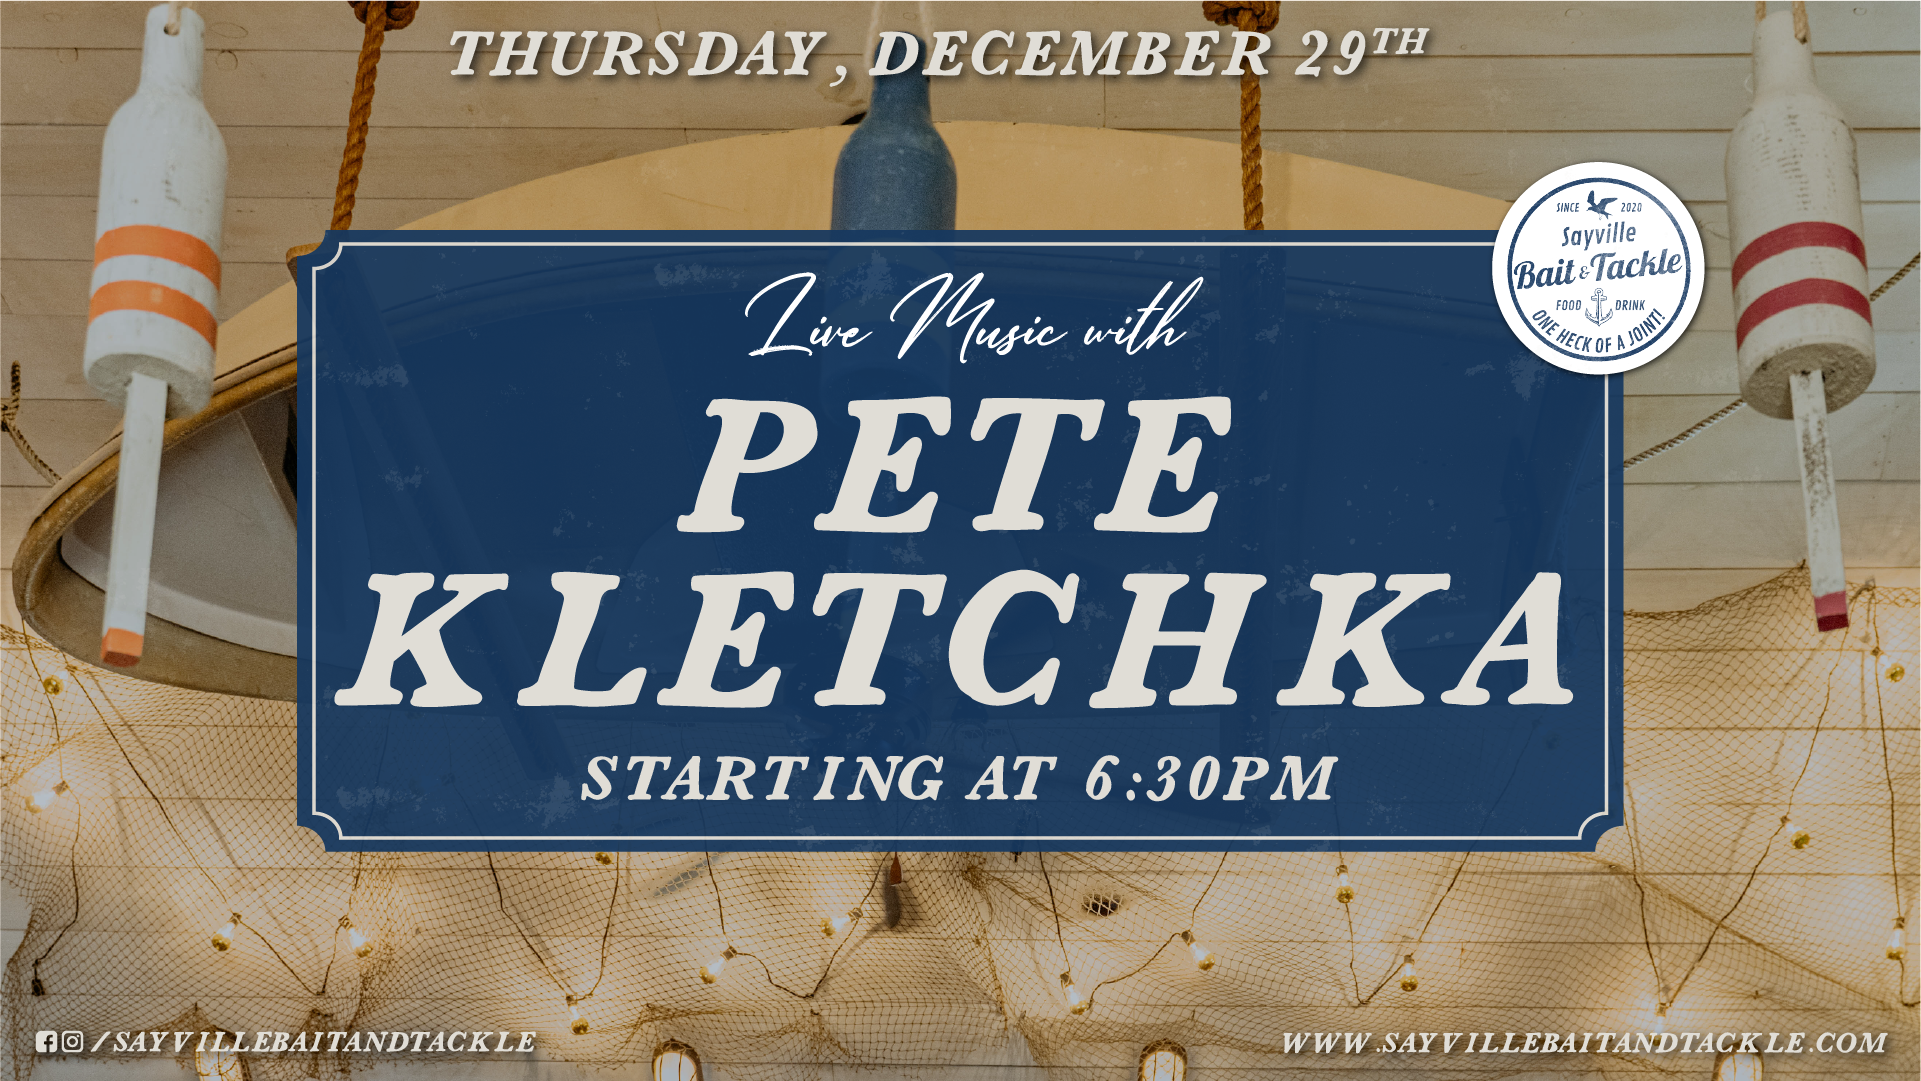 Live Music with Pete Kletchka! — Sayville Bait & Tackle